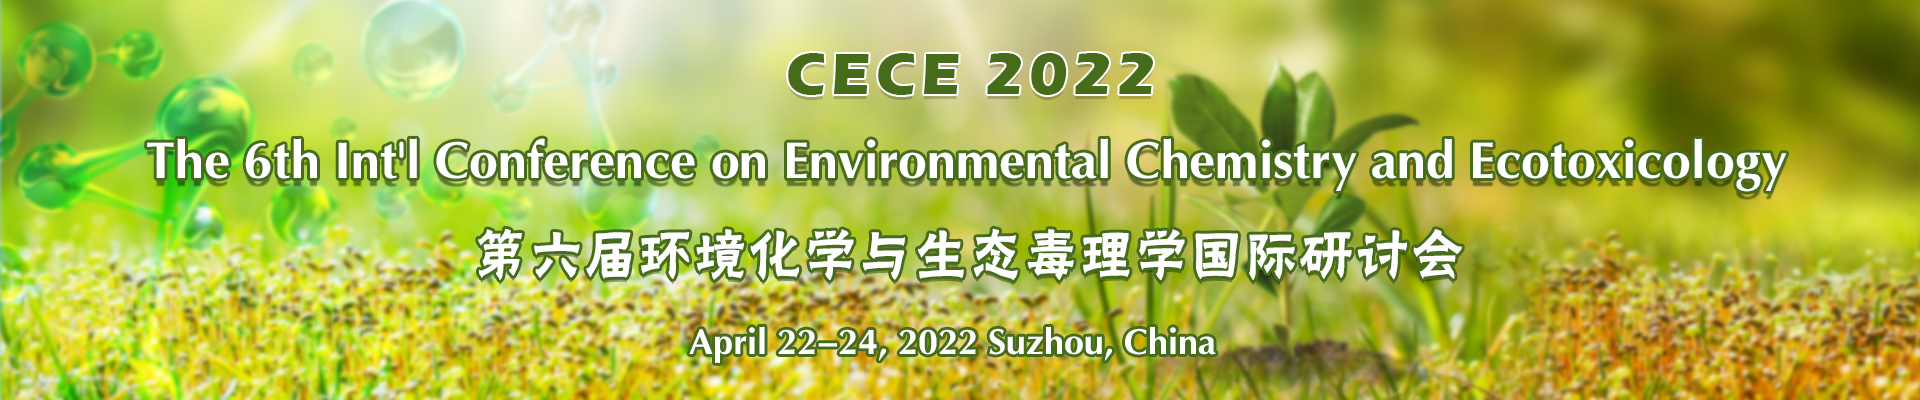 The 6th Int'l Conference on Environmental Chemistry and Ecotoxicology (CECE 2022), Suzhou, Jiangsu, China